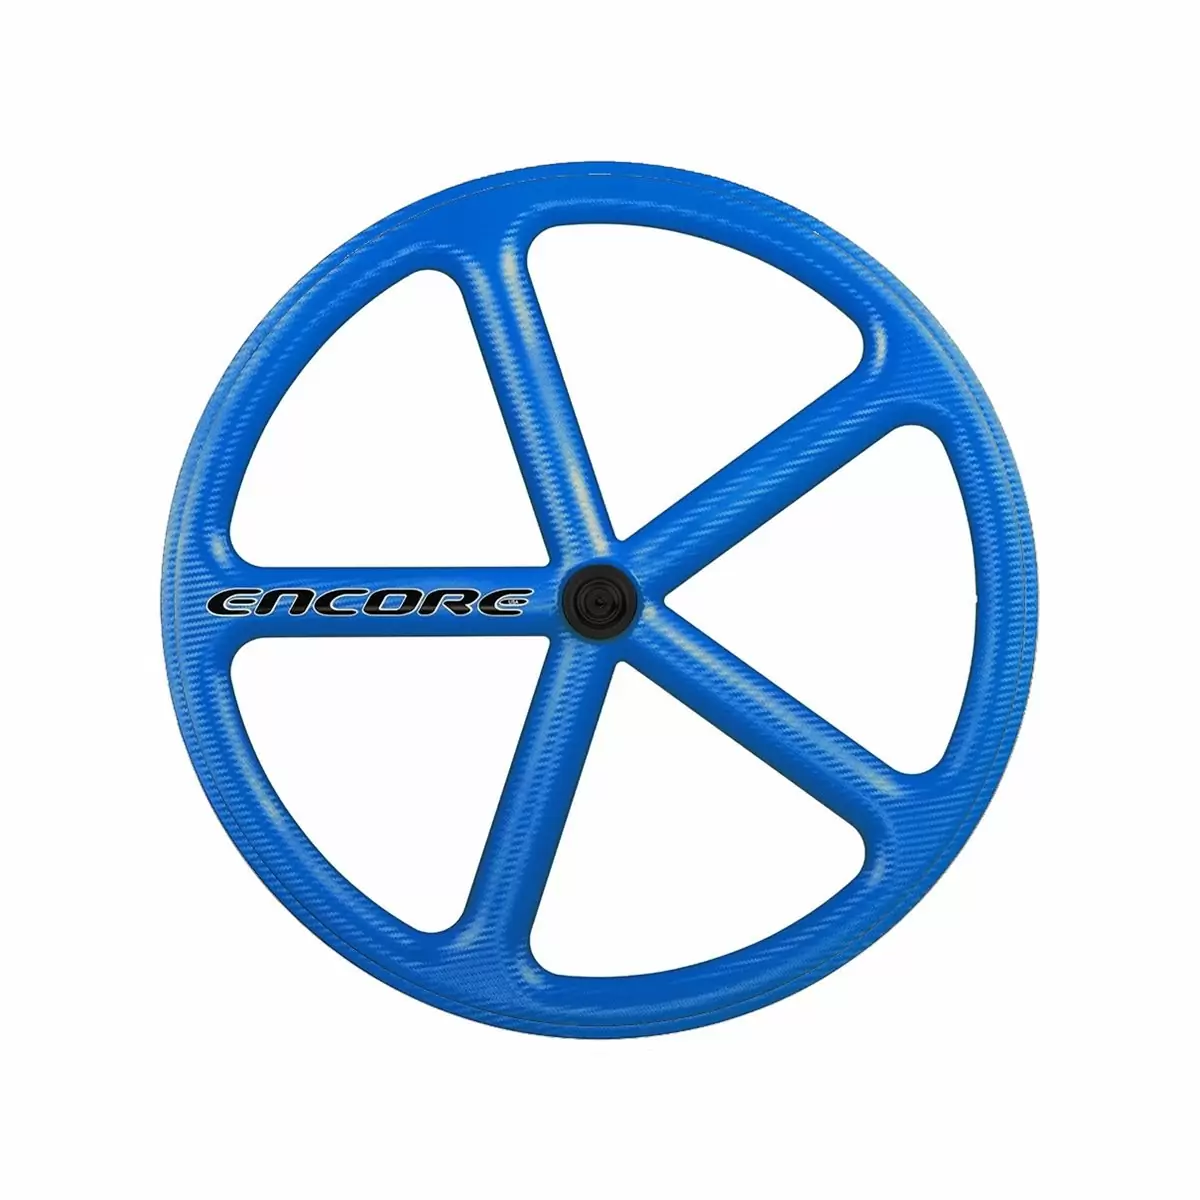 front wheel 700c track 5 spokes carbon weave blue nmsw - image